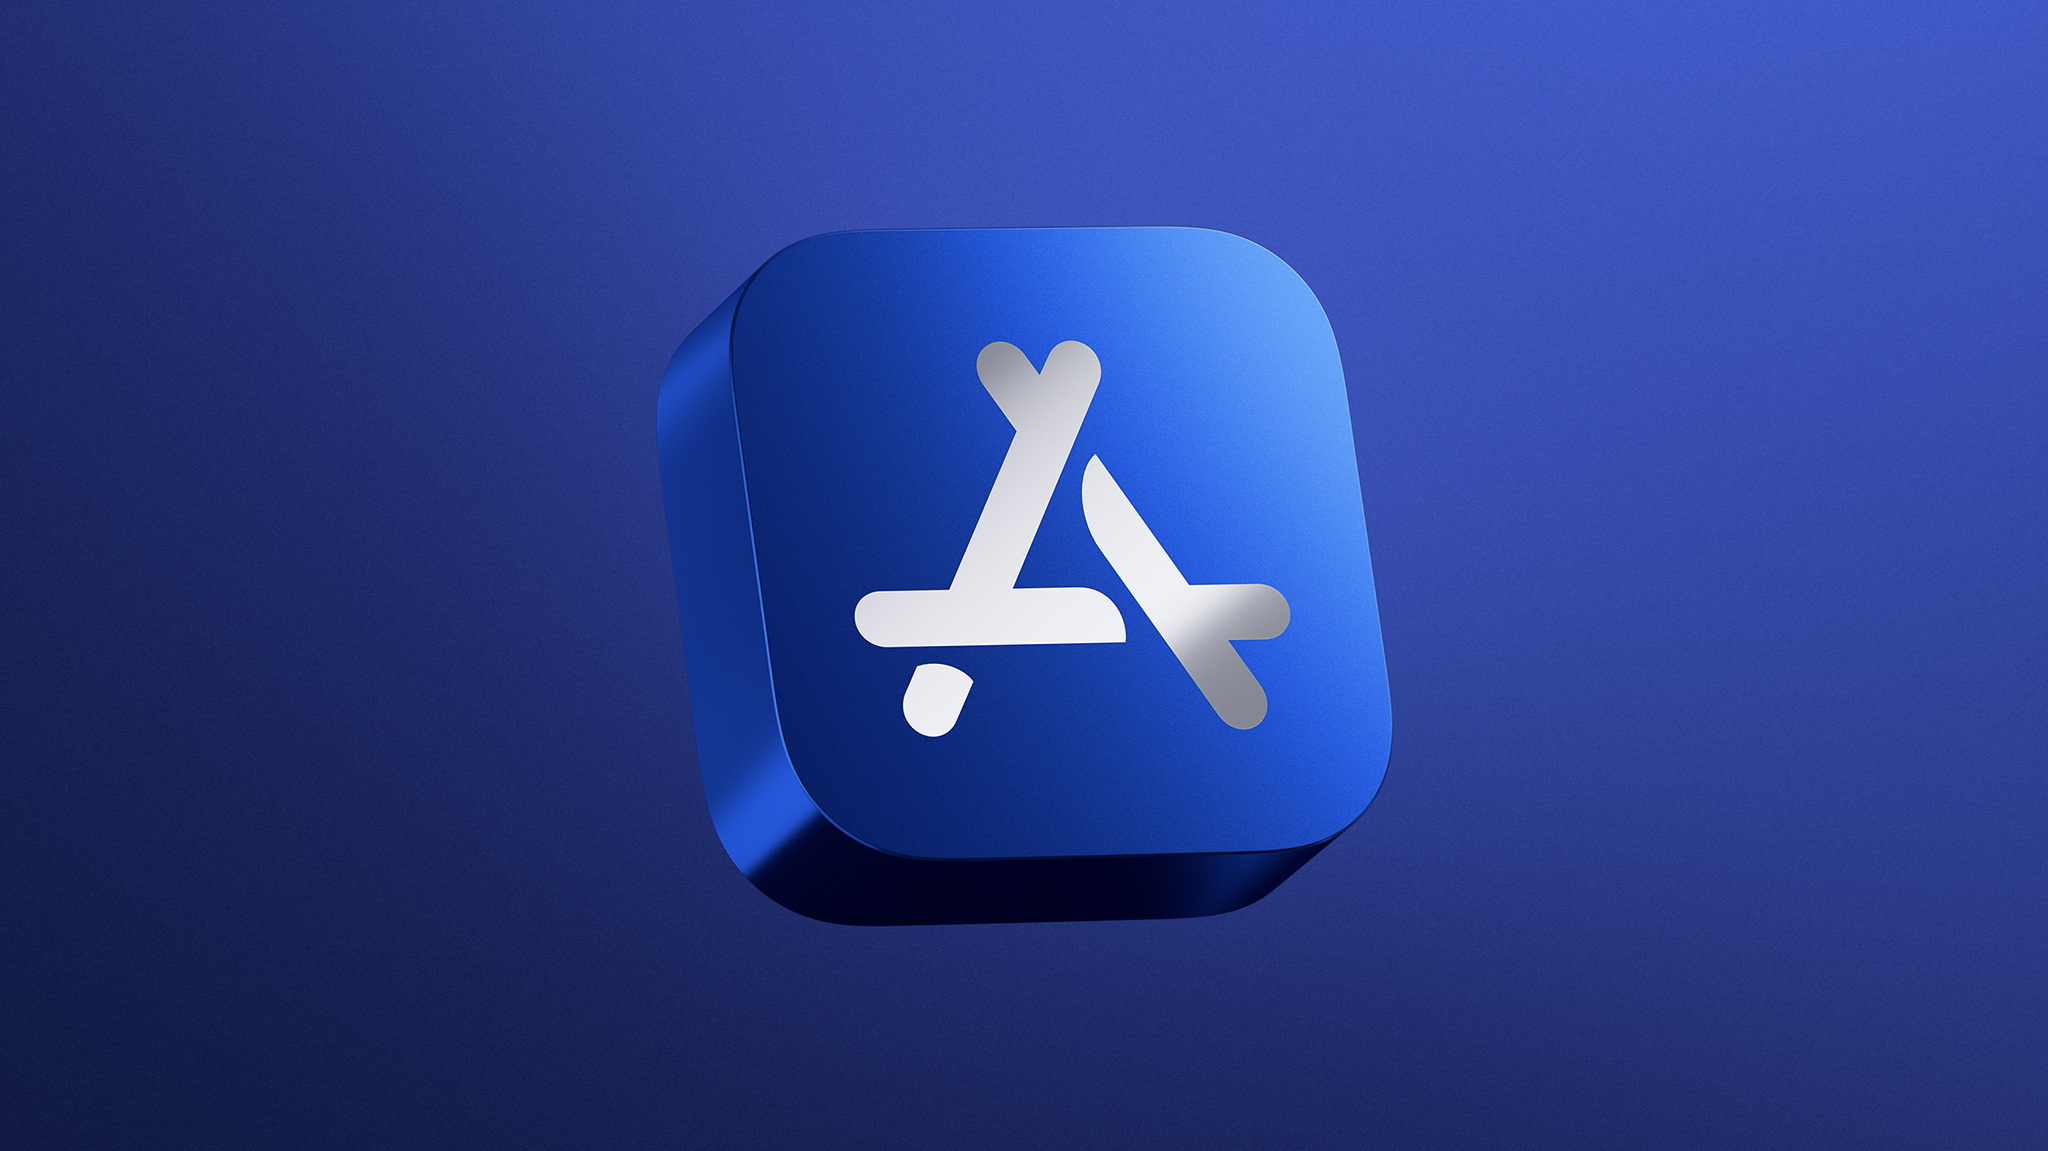 The App Store Awards icon